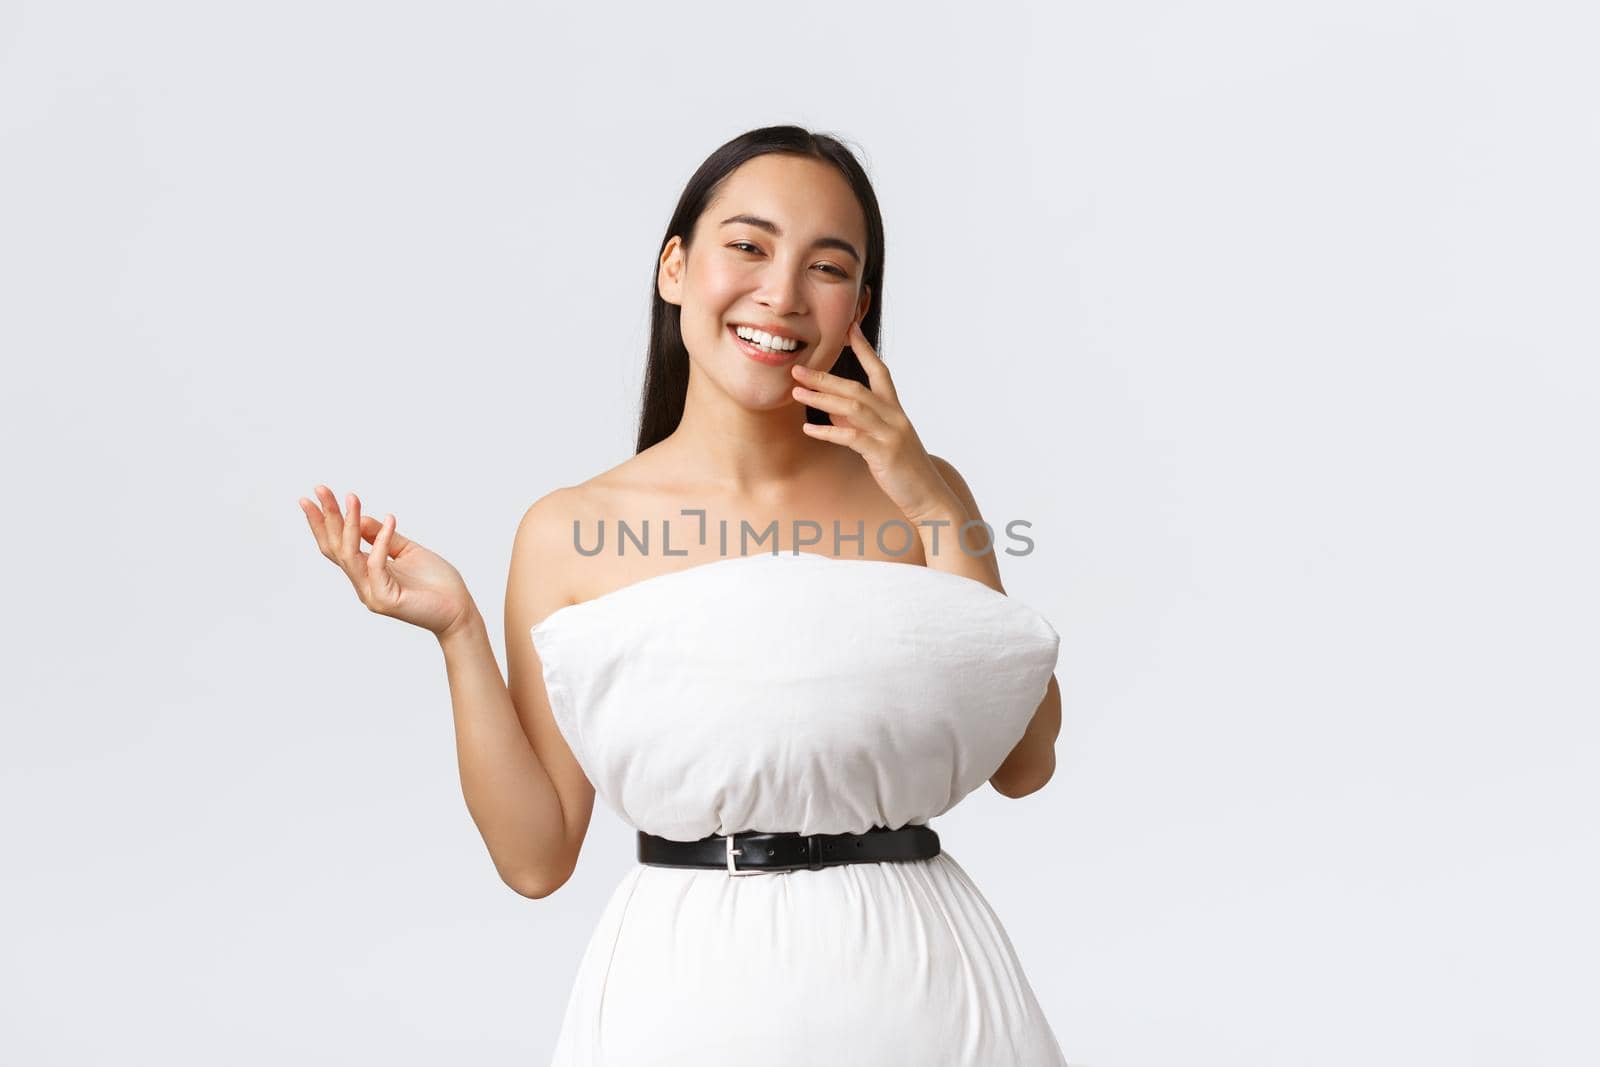 Beauty, fashion and social media concept. Pretty happy asian woman laughing and show-off her new outfit made of pillow and belt, posing in pillow dress over white background.